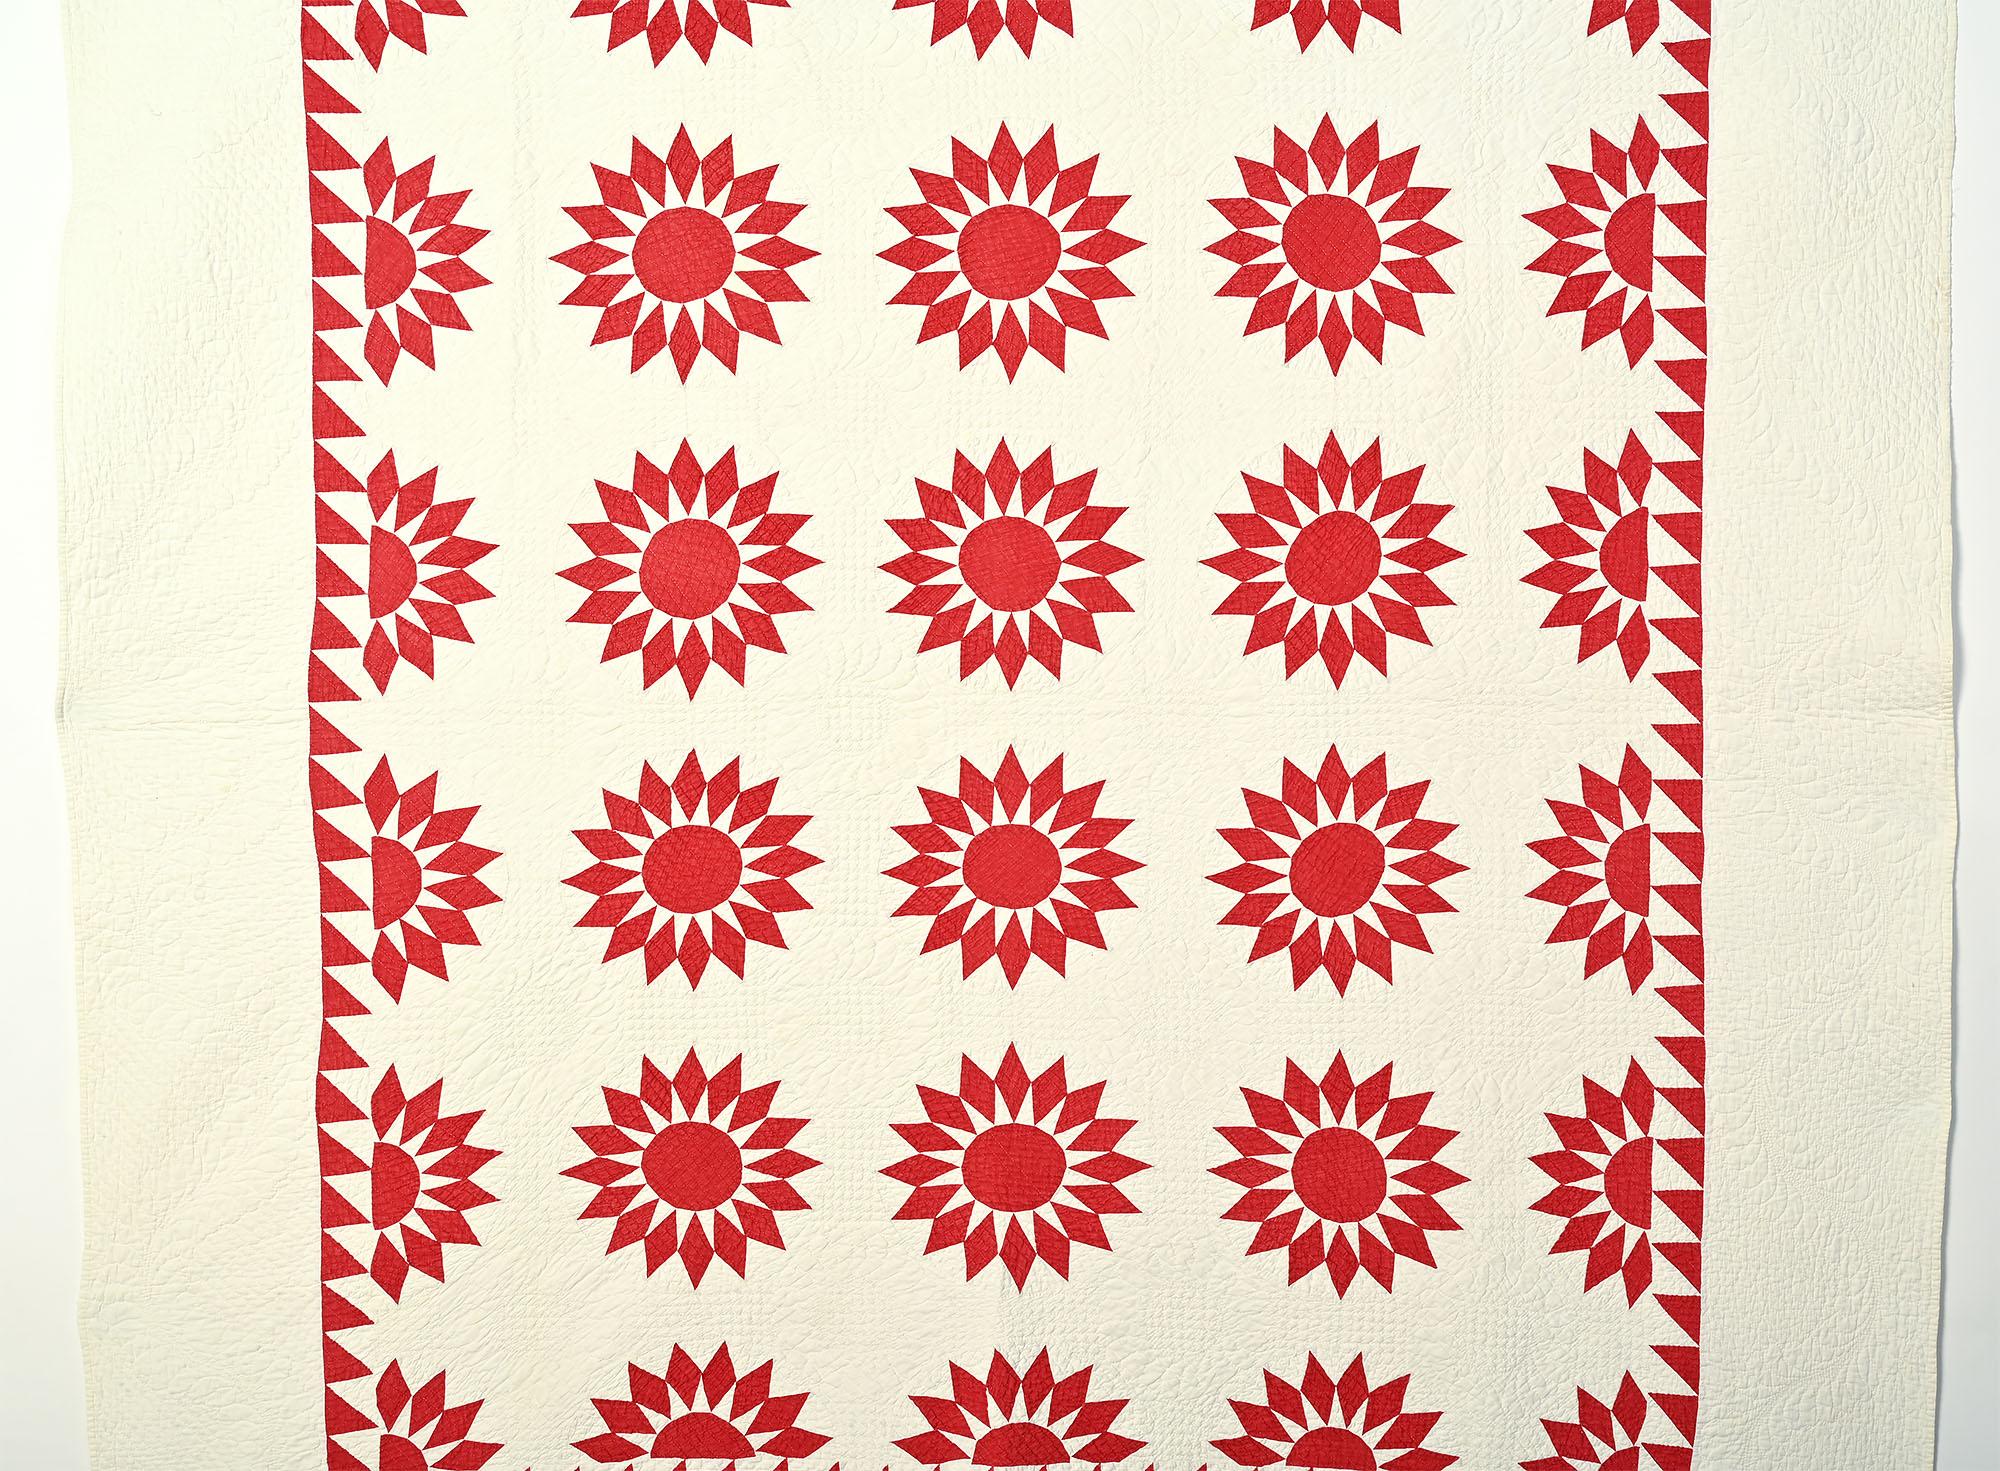 This Sunburst is especially well pieced and quilted. The red and white triangles come to the sharp points that one likes to see. Quilting is dense and done with a variety of patterns. There are checkerboards in the red circle centres and fine